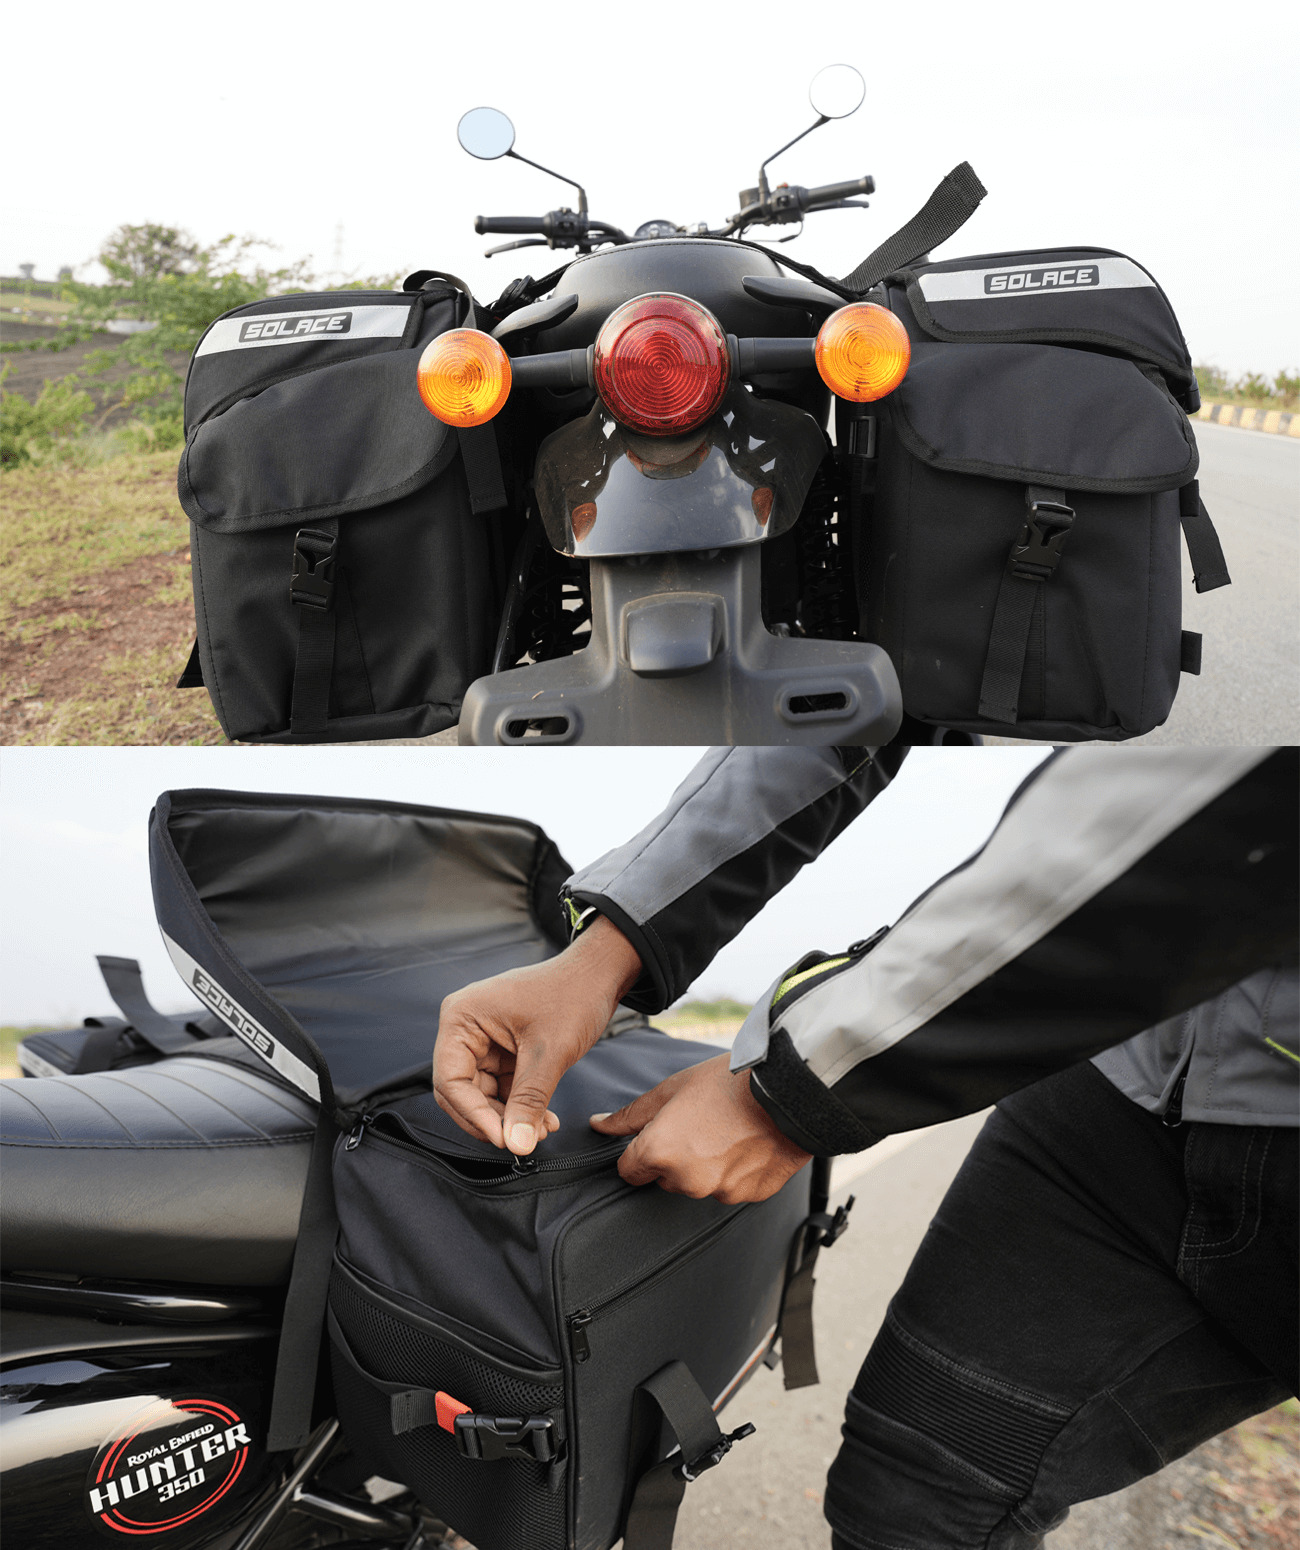 RE INTERCEPTOR / CONTINENTAL GT SIDE PANEL BAG at best price in New Delhi |  ID: 2852853389397